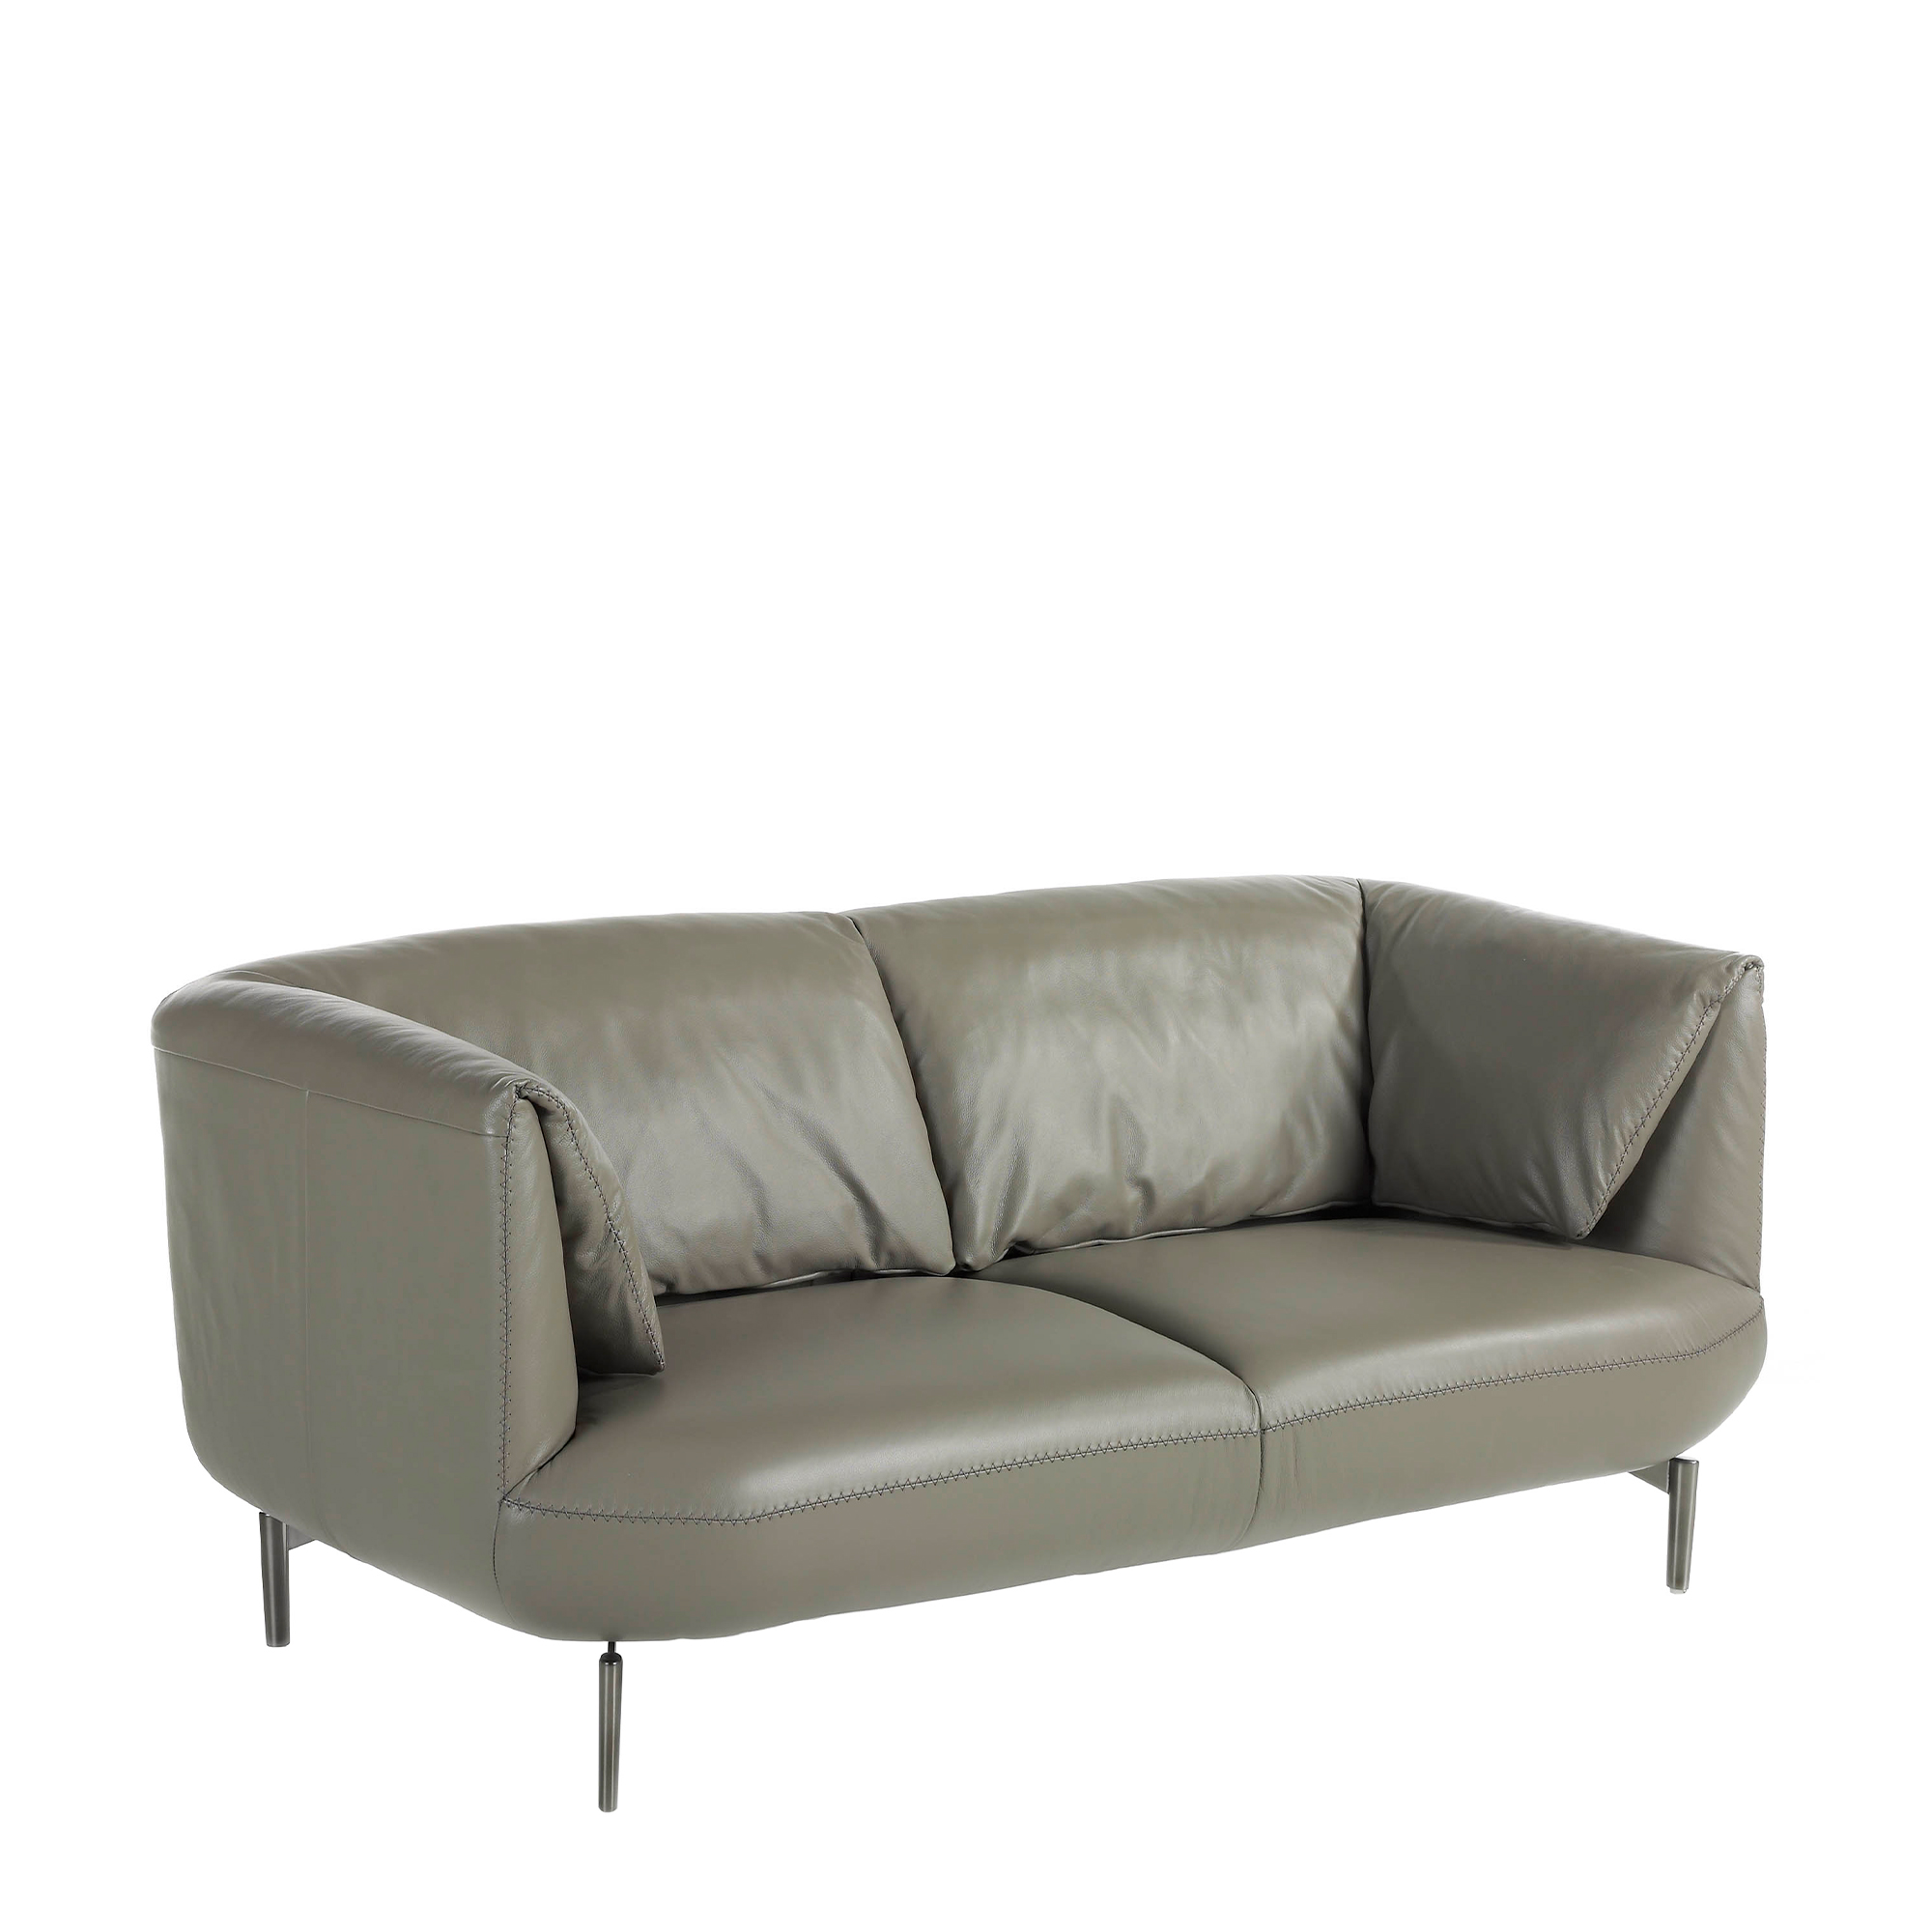 2-seater sofa upholstered in leather with polished steel legs